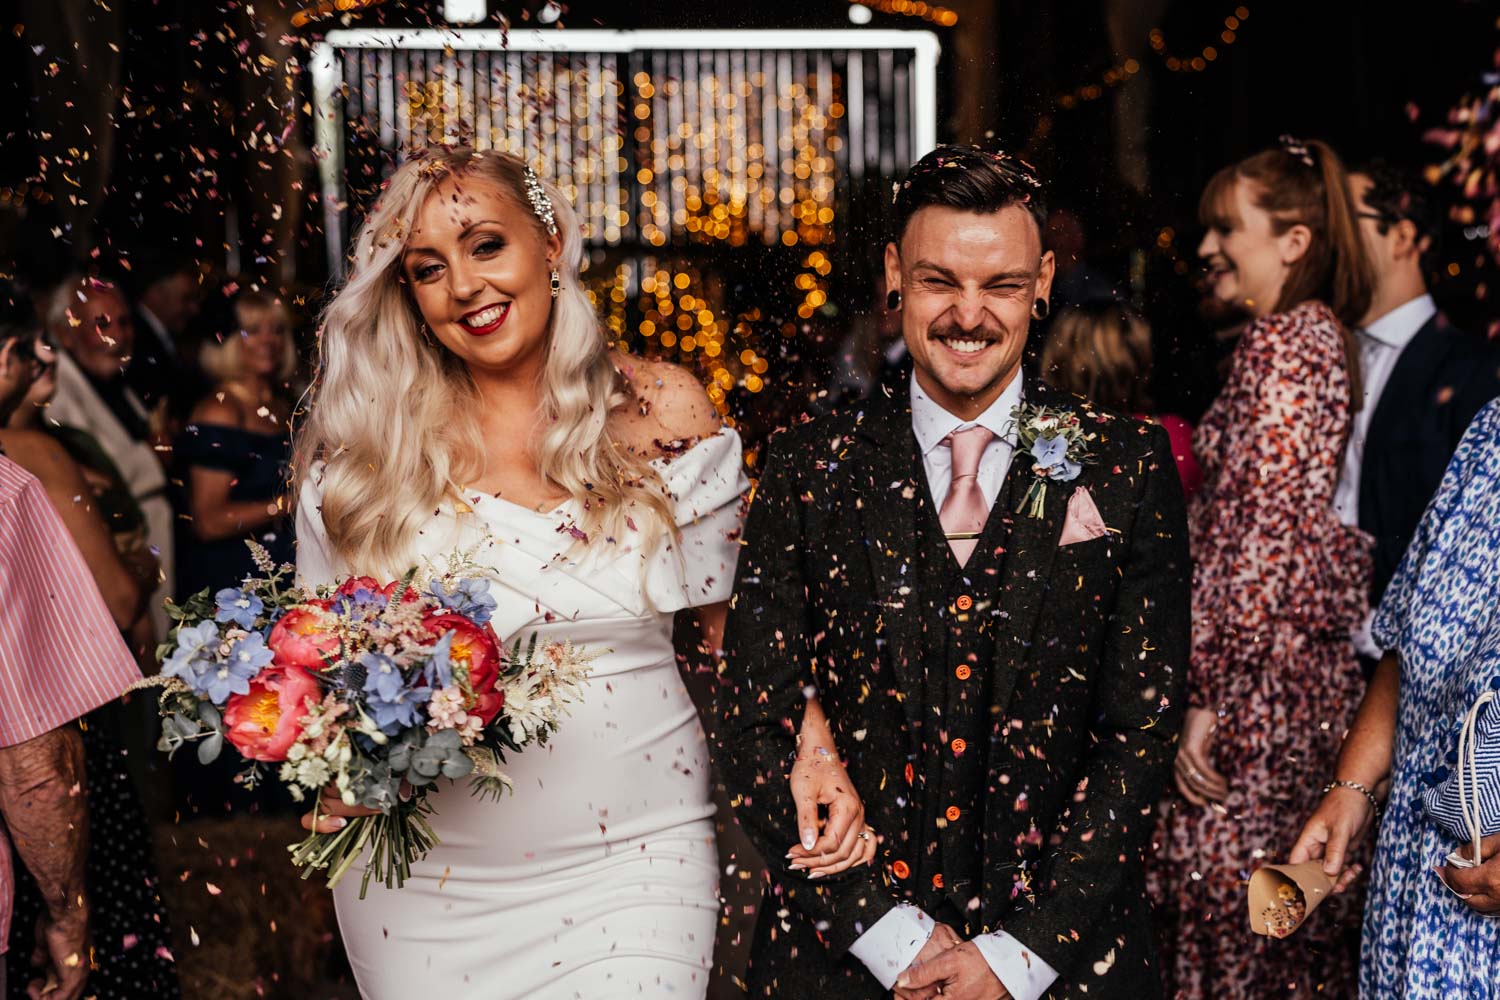 Newlyweds smiling as confetti falls in front of them. The bride is holding a colourful bouquet of flowers. Joss Denham Photography